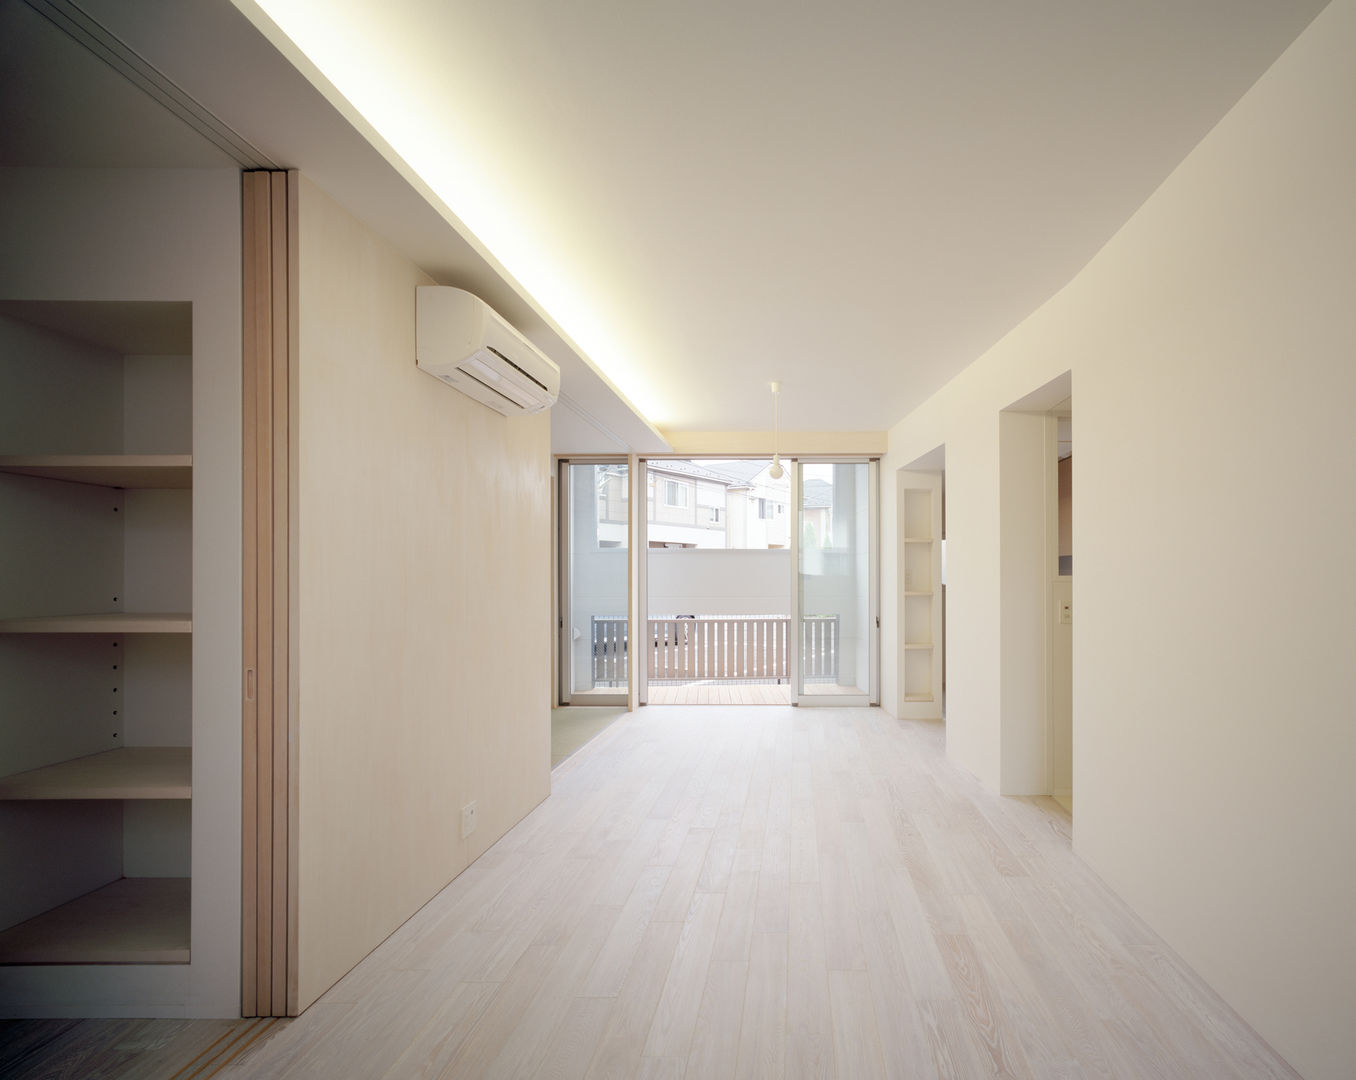 house which shares light , 津野建築設計室/troom 津野建築設計室/troom Living room